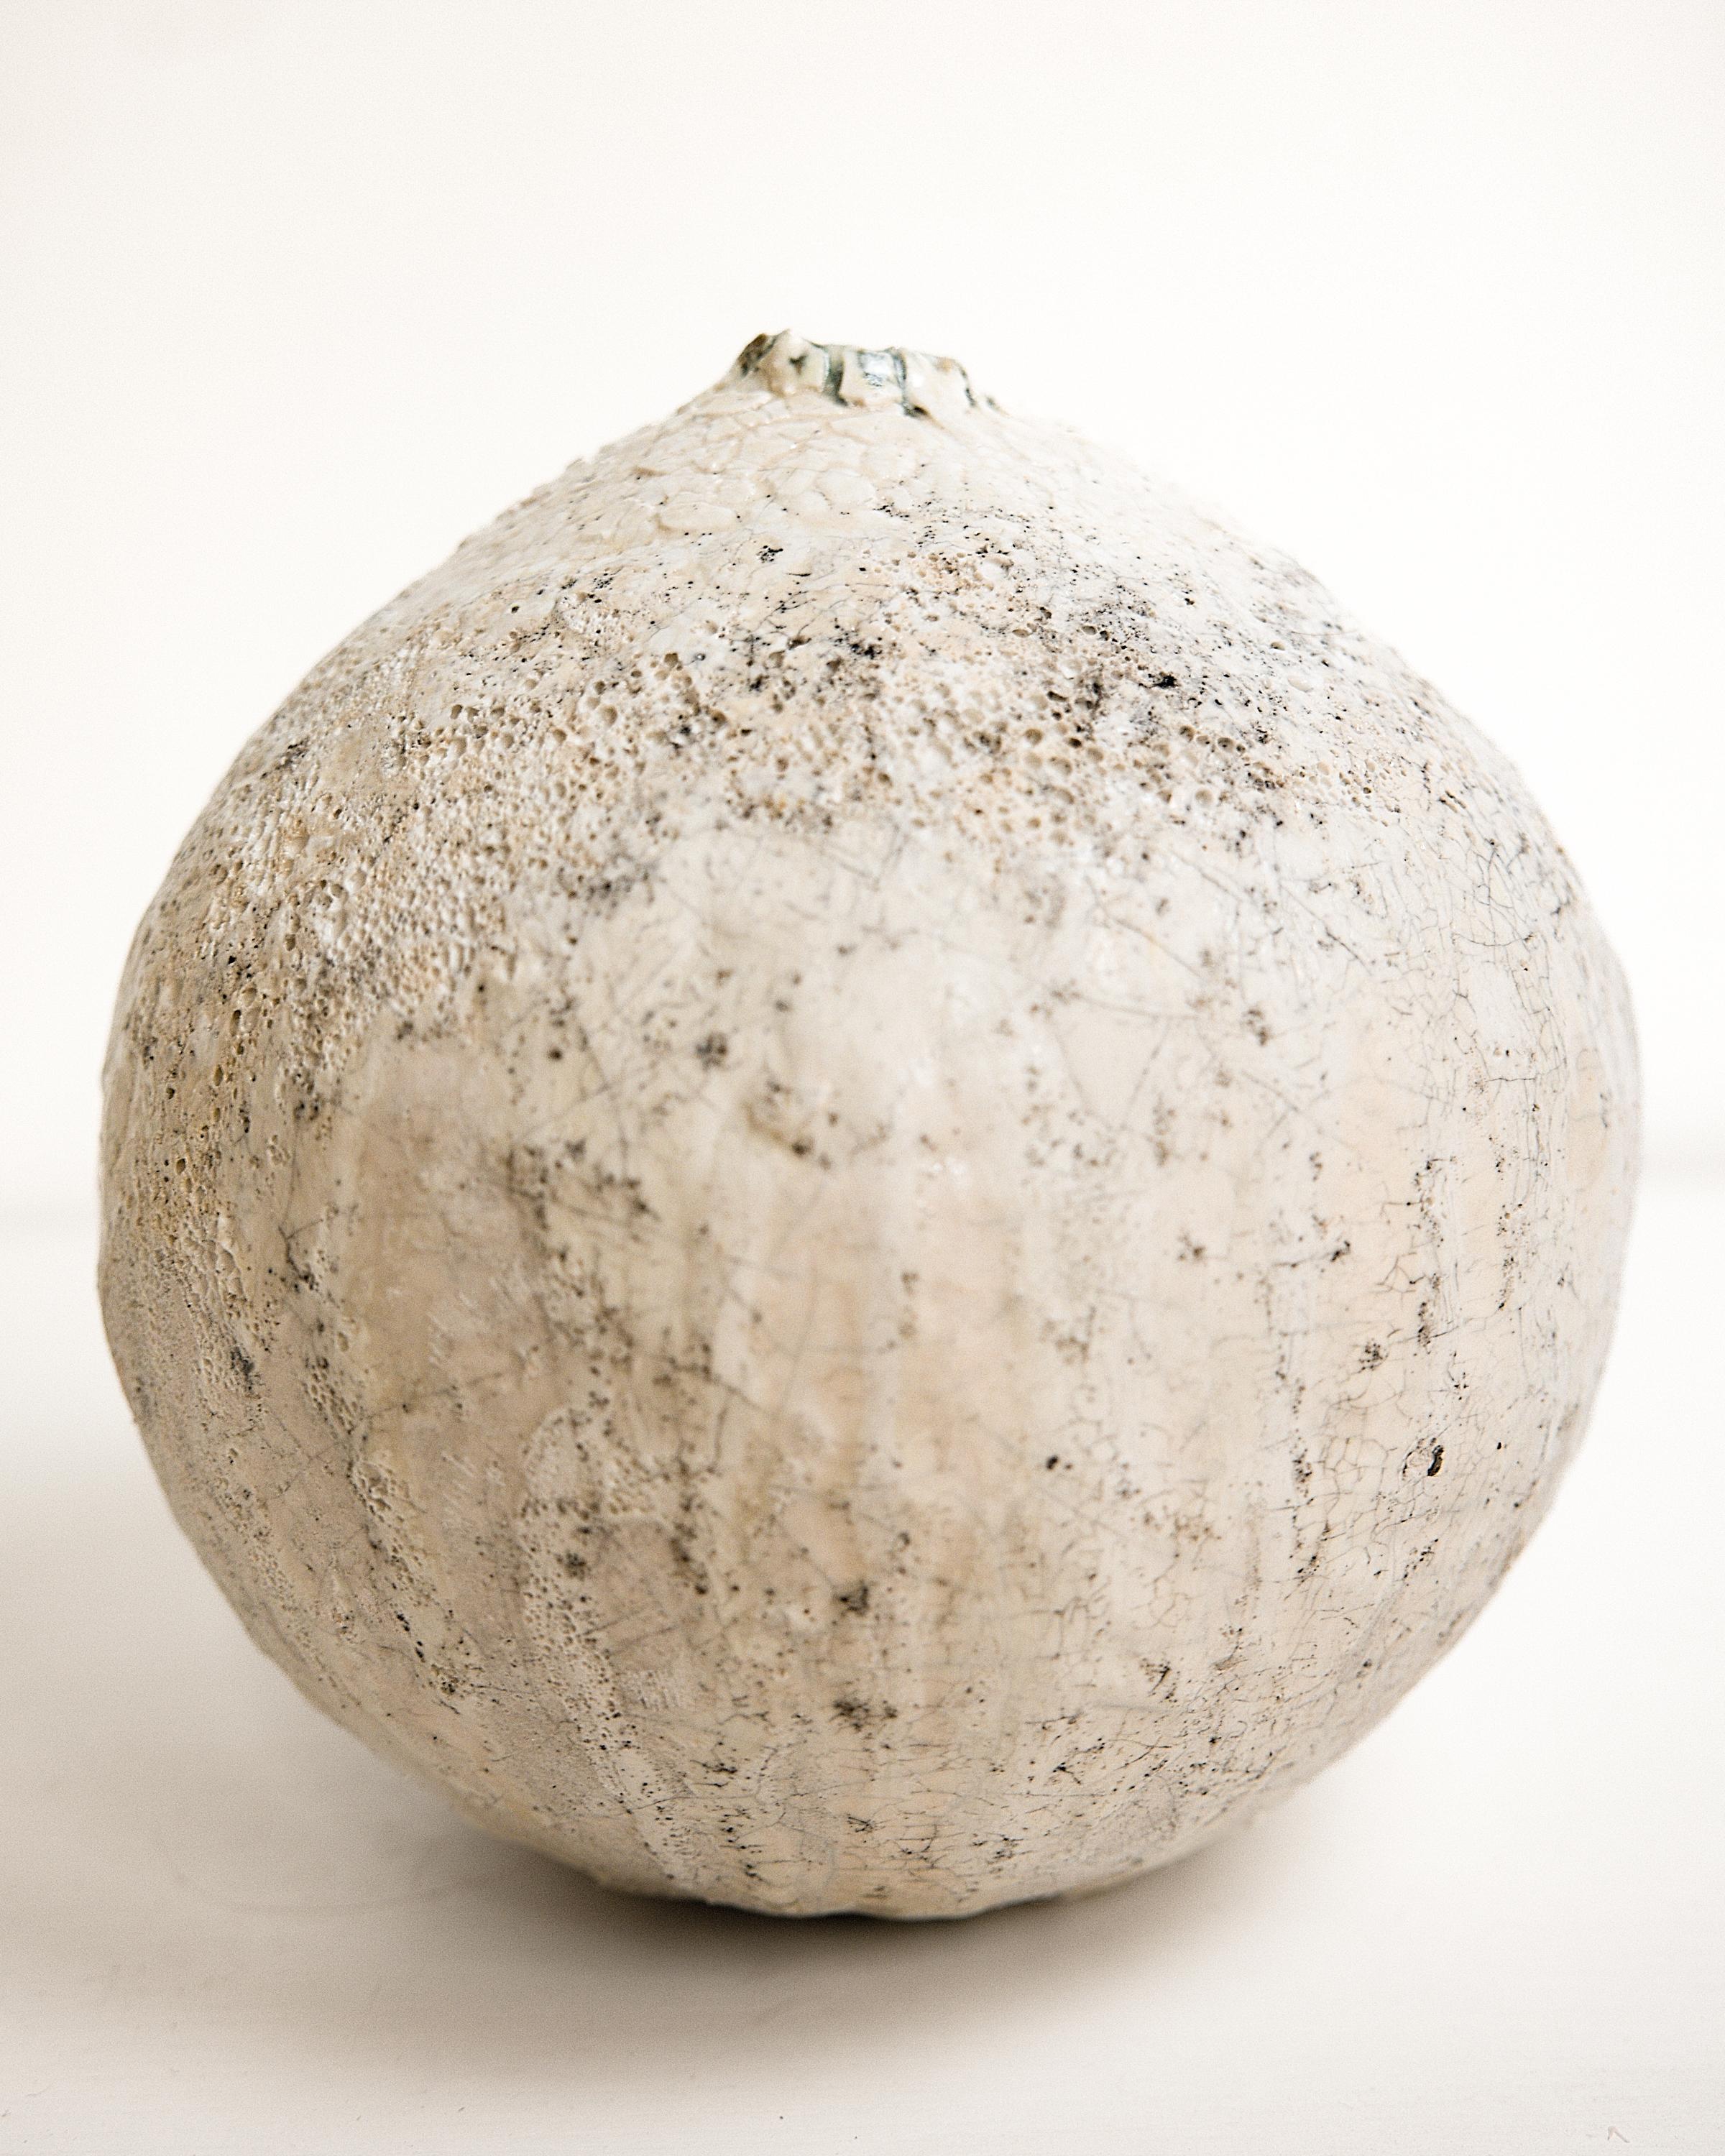 Bring a touch of modern style to your home with our Cream texture Moon vases
one of kind 
this White moon jar with Textured drips 
 Matt glaze 
one of a kind

., each striking vase features a unique, moon-like design in an eye-catching light lava